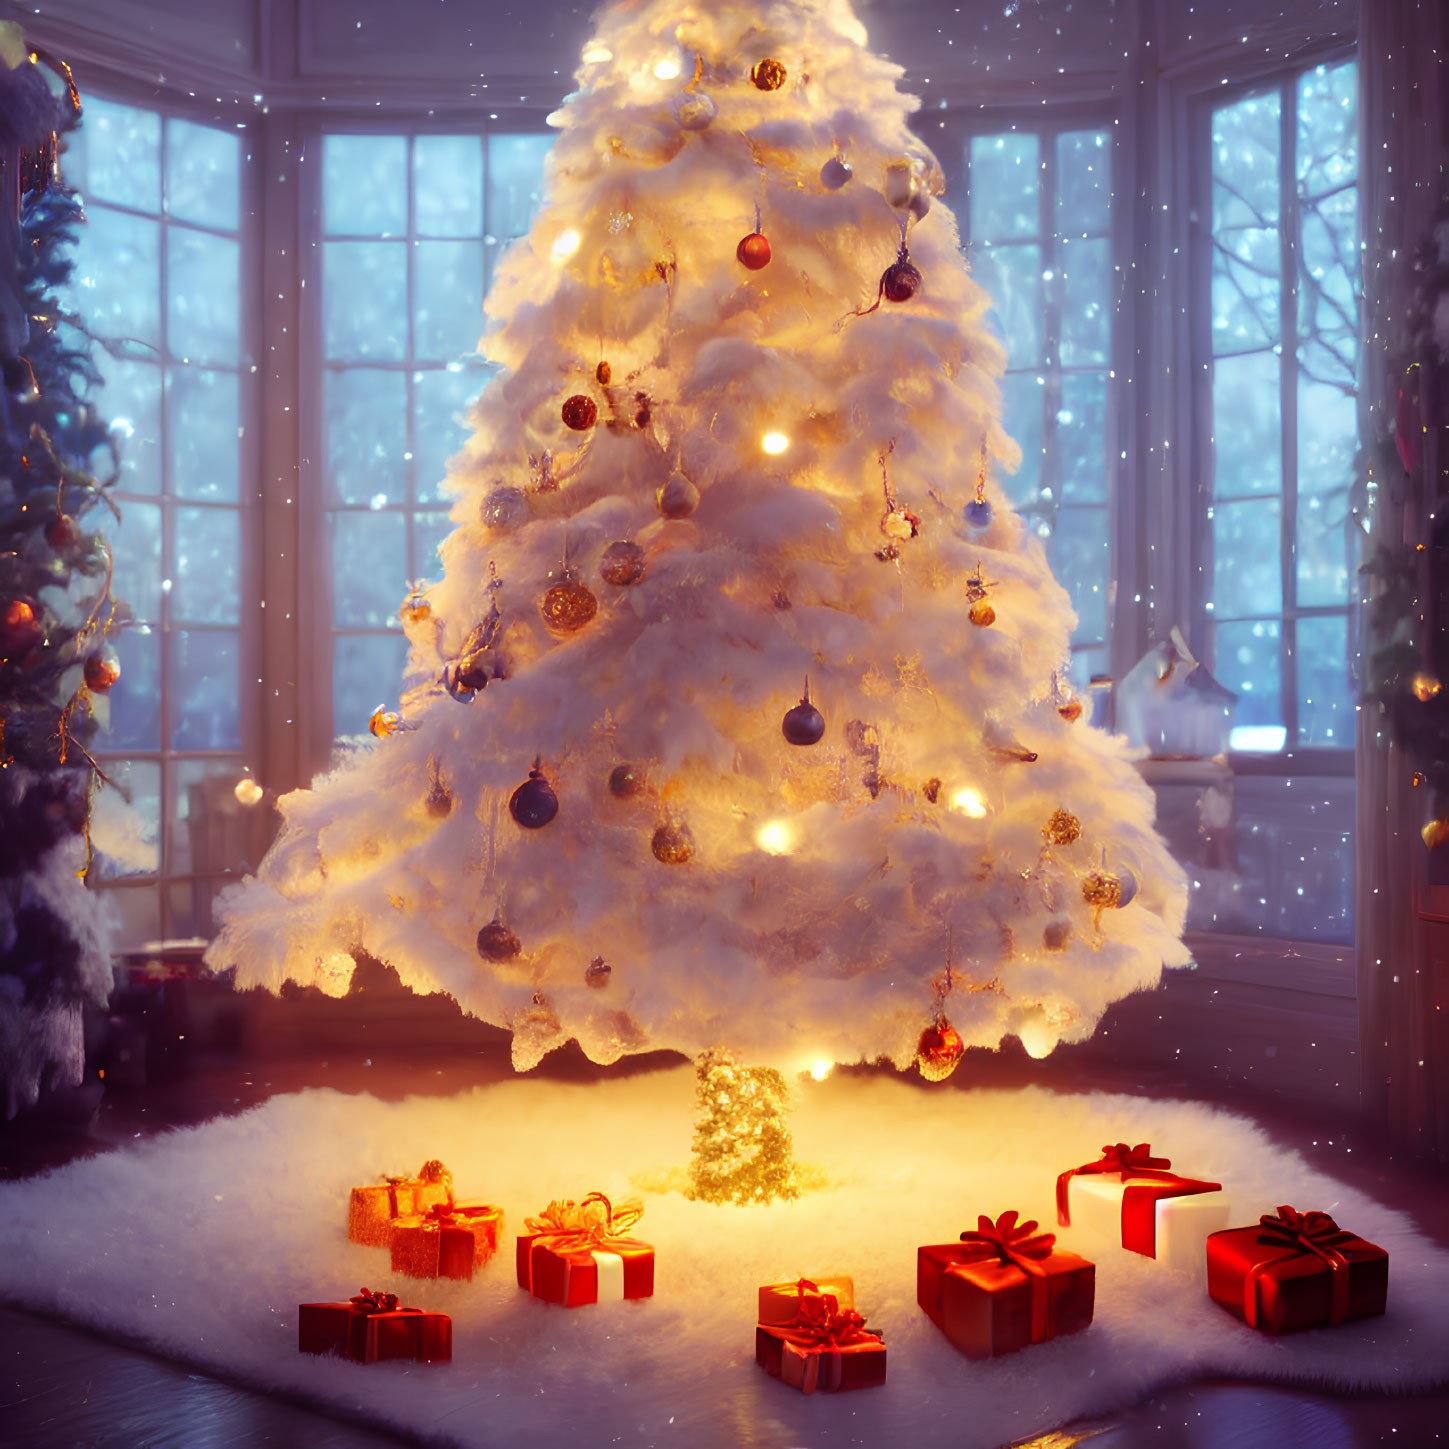 White Christmas tree with warm lights and ornaments in cozy snow-covered room